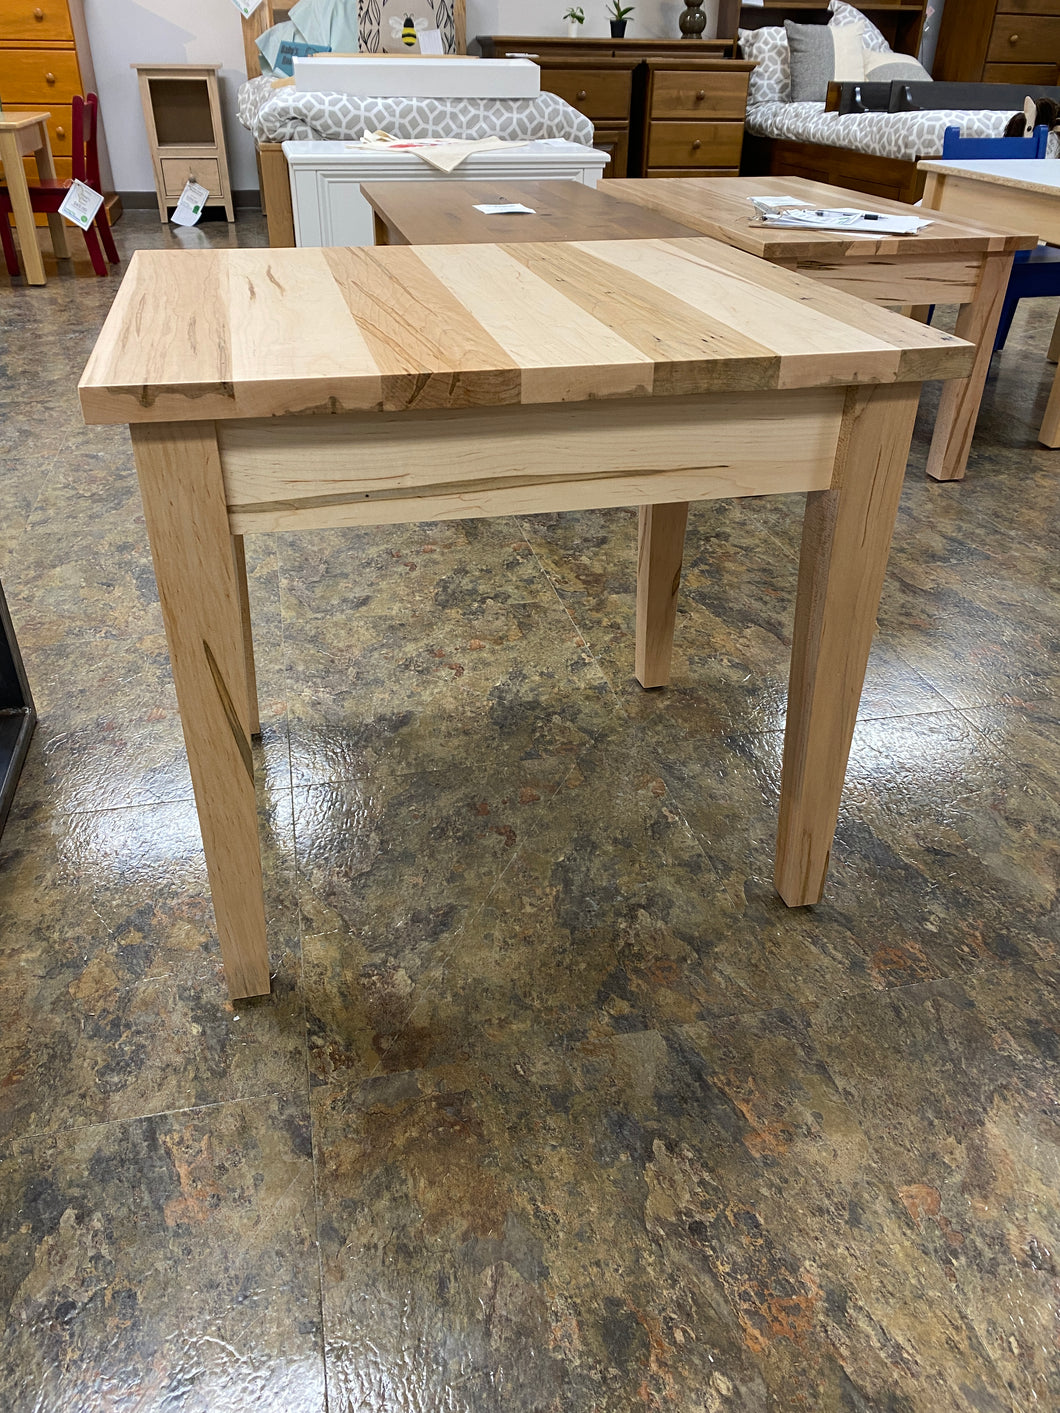 End table with tapered legs